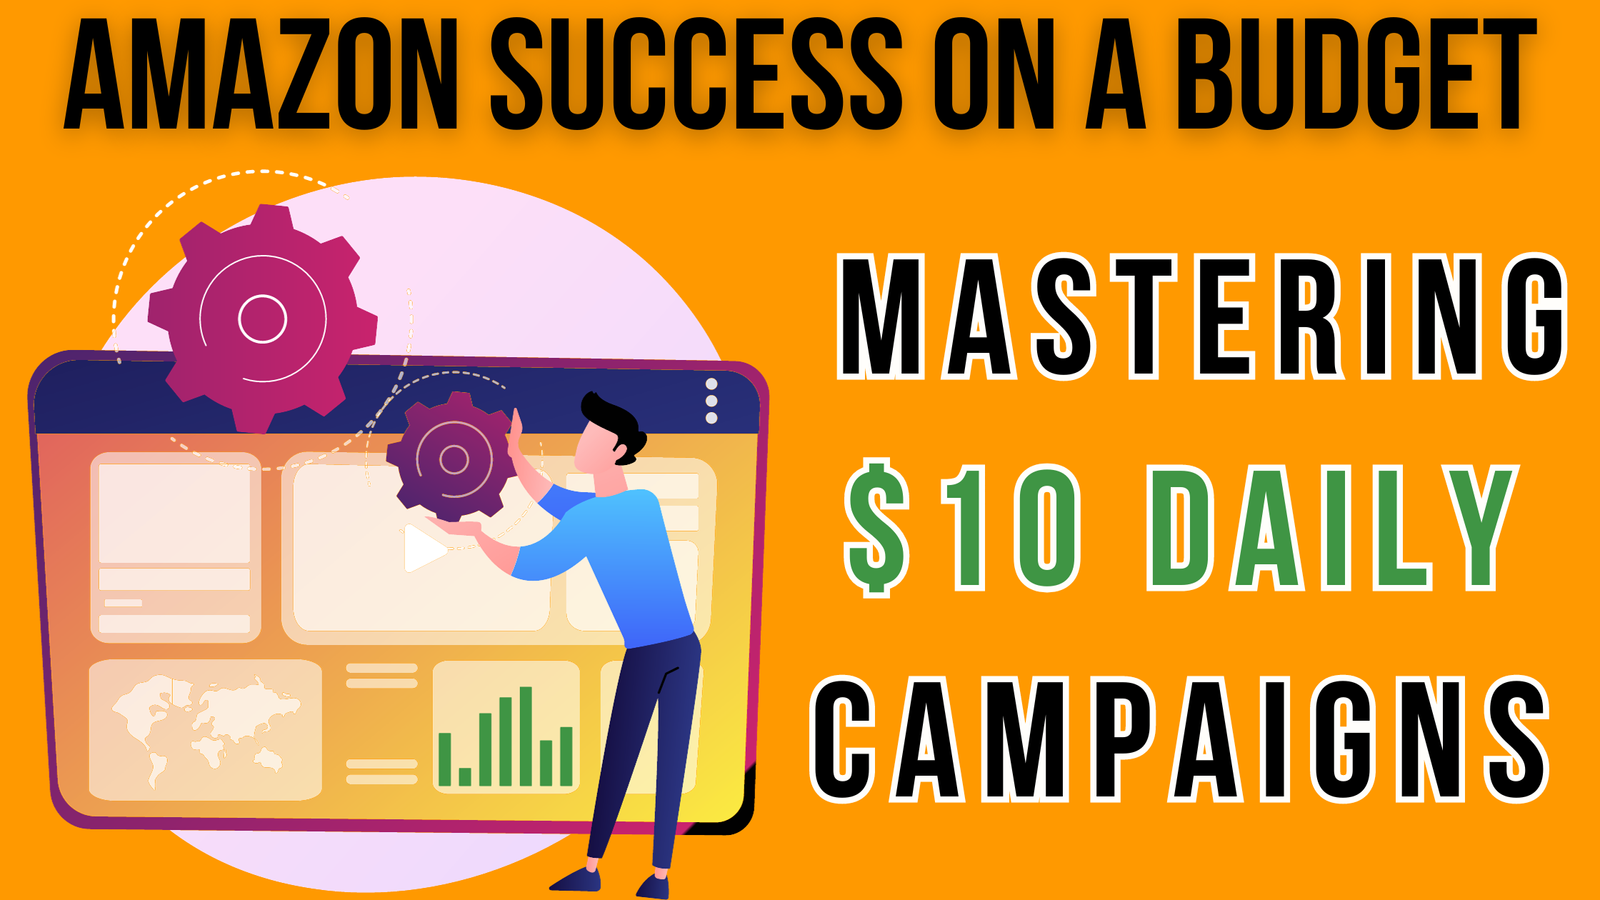 Amazon Success on a Budget: Mastering $10 Daily Campaigns